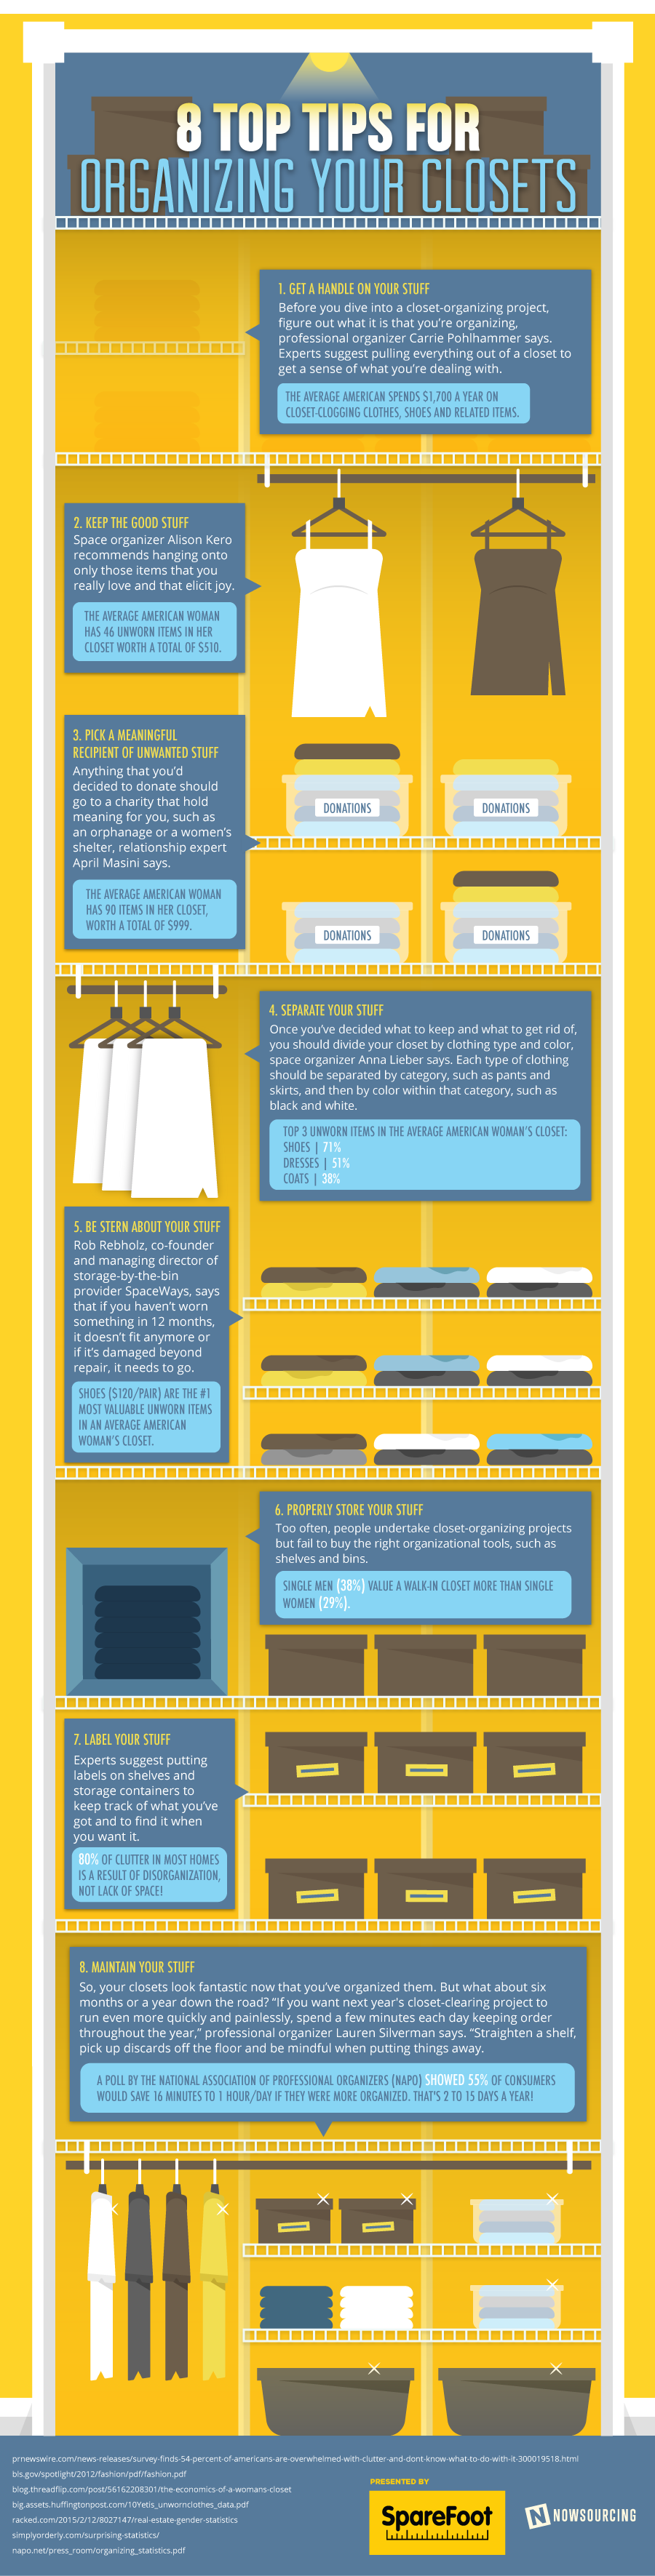 8 Tips For Organizing Your Closets